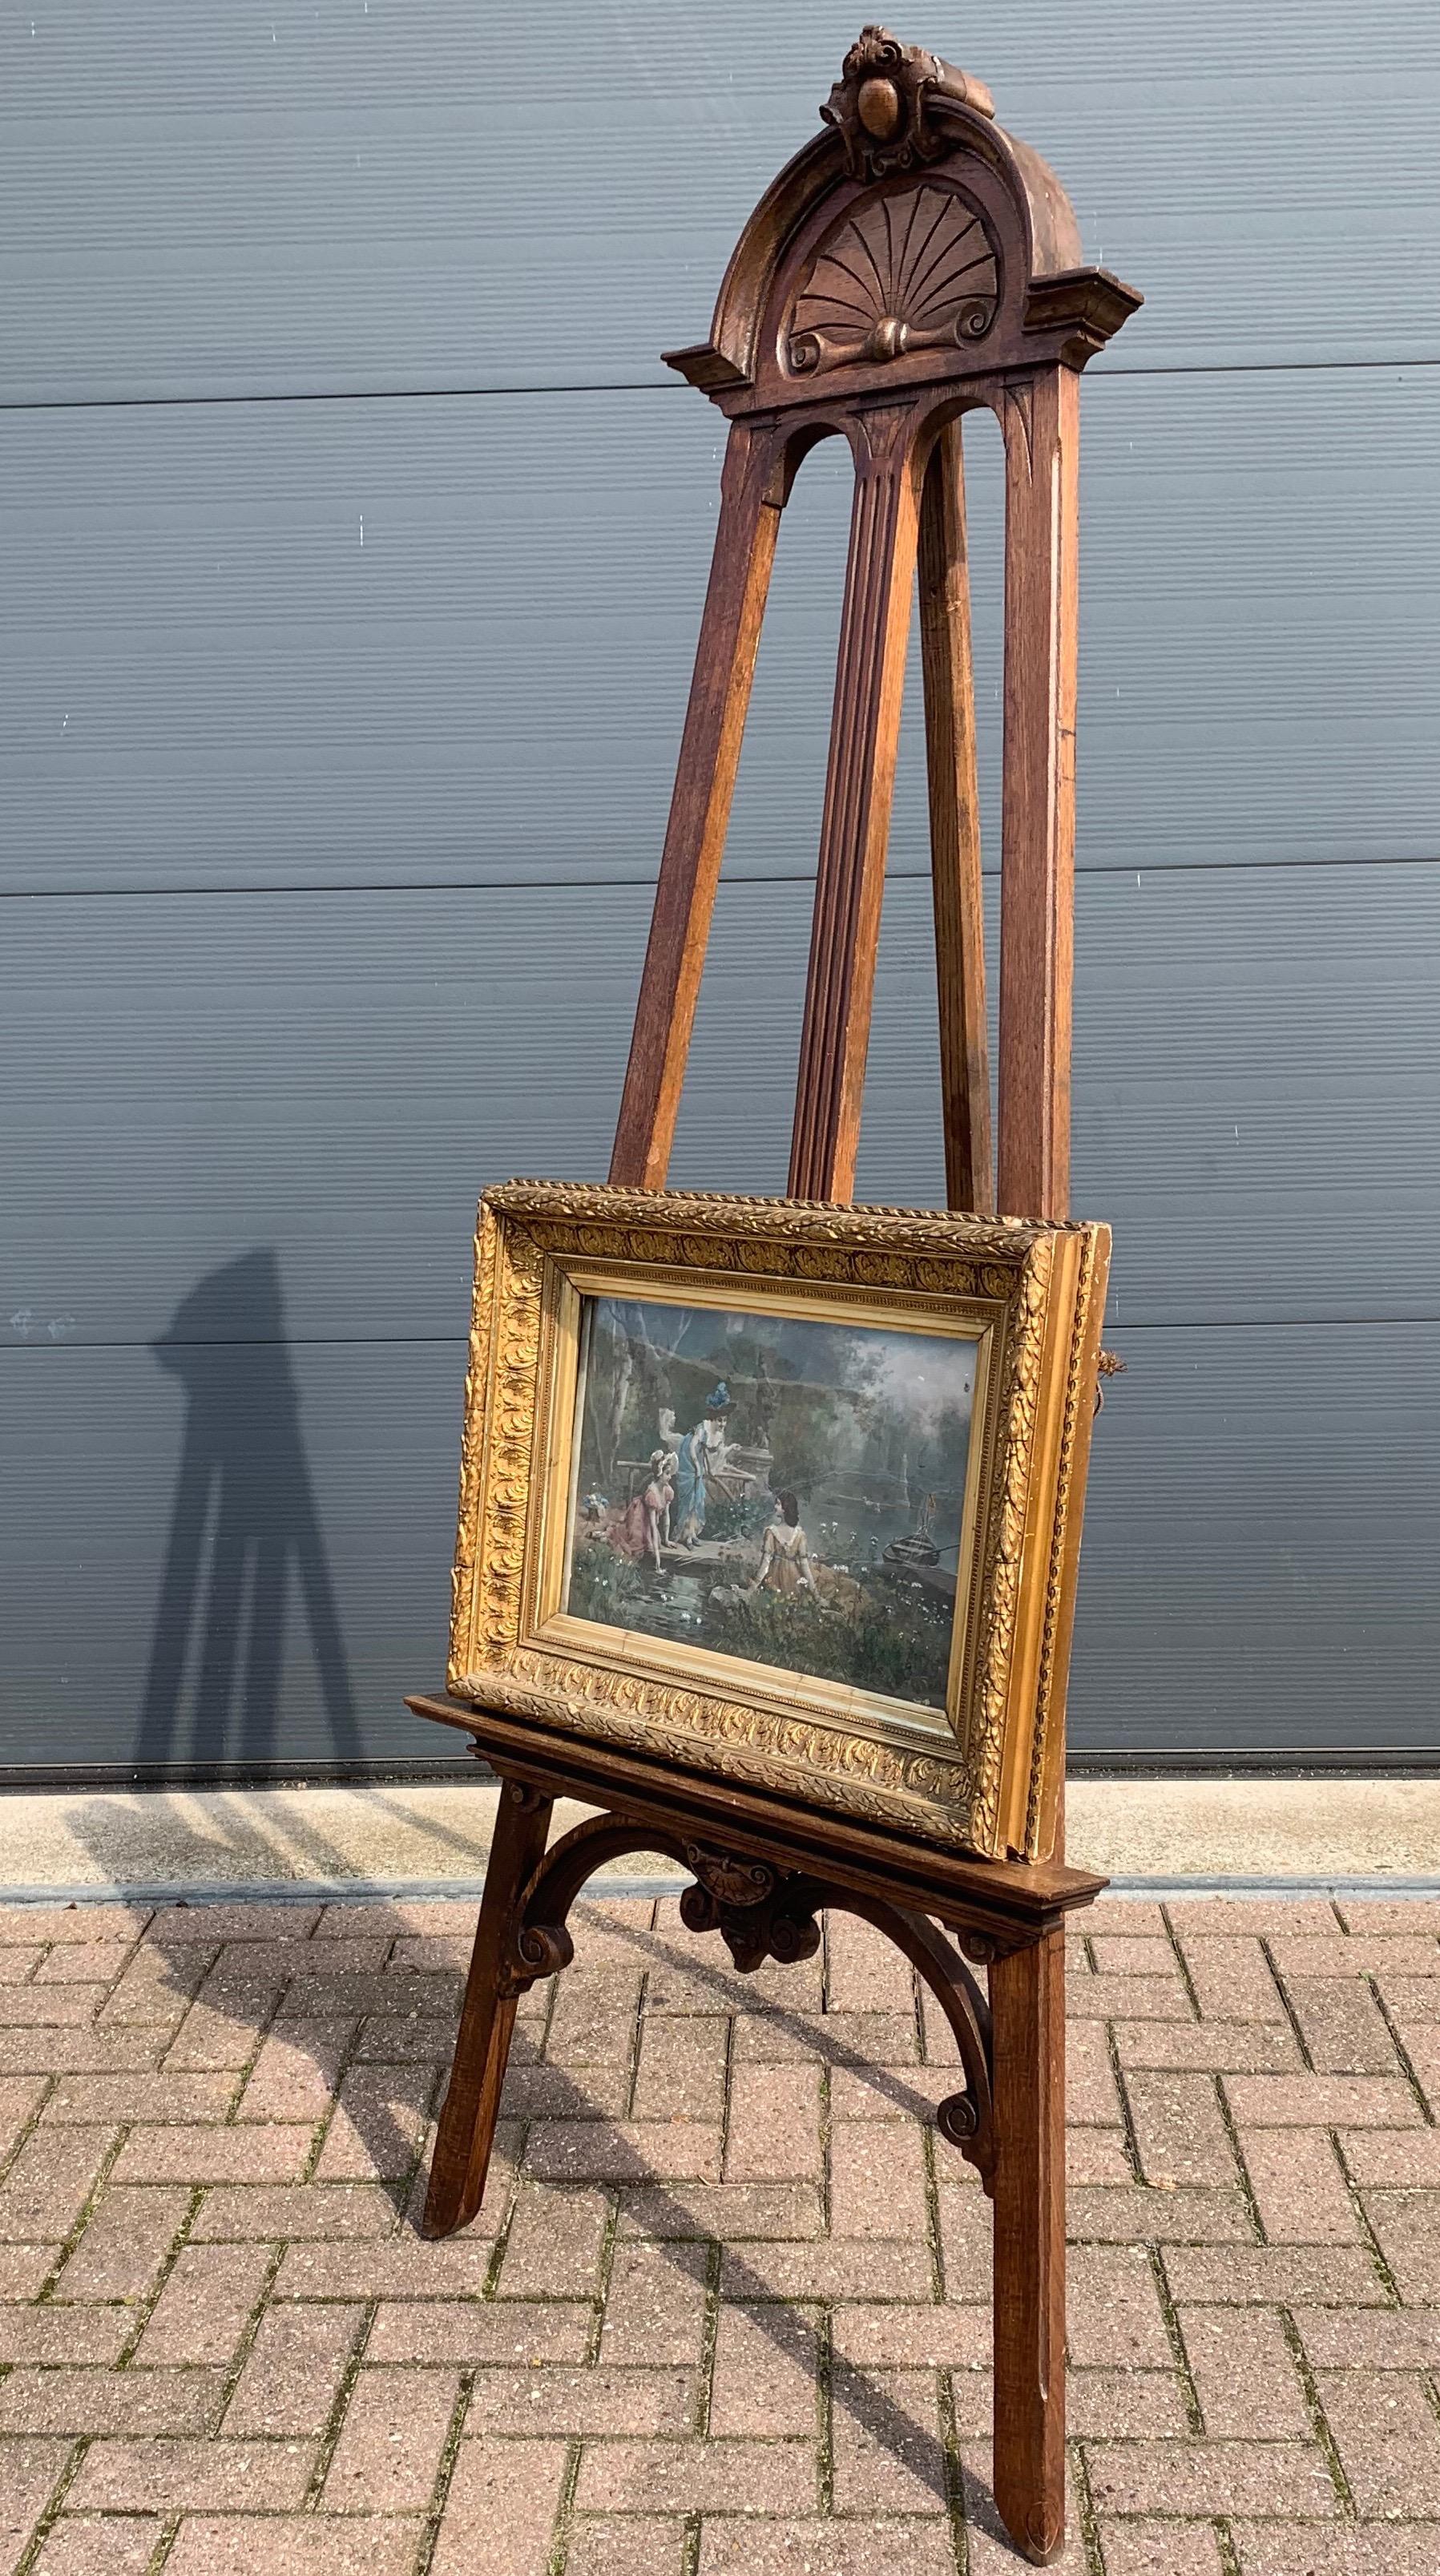 Large Antique Classical Style Studio or Gallery Easel / Painting Display Stand 1